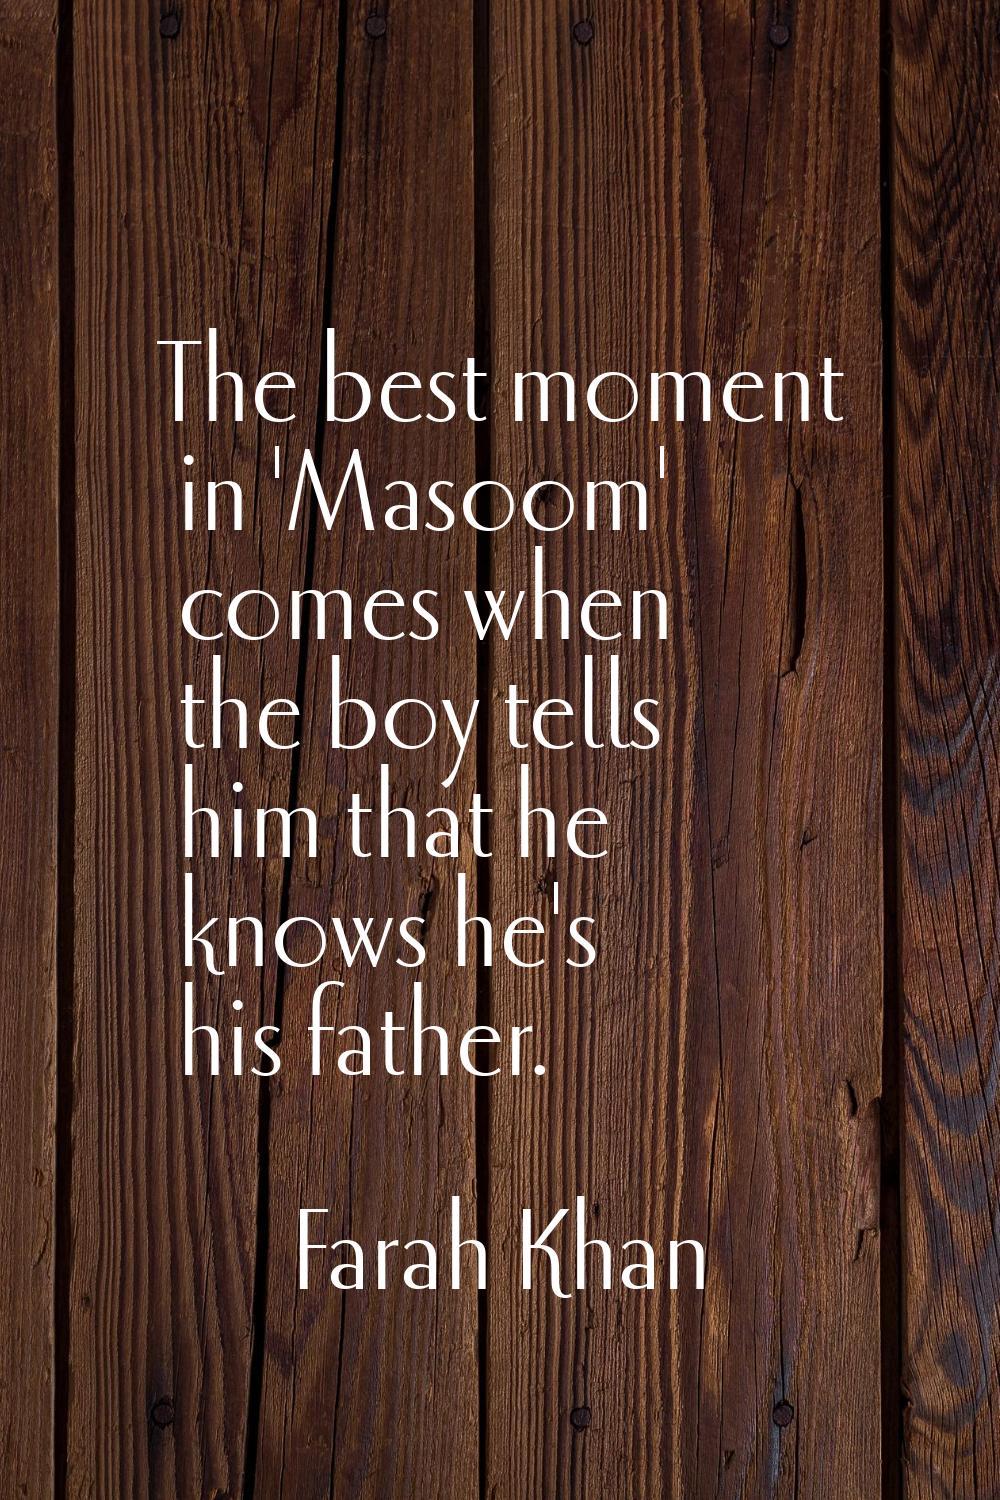 The best moment in 'Masoom' comes when the boy tells him that he knows he's his father.